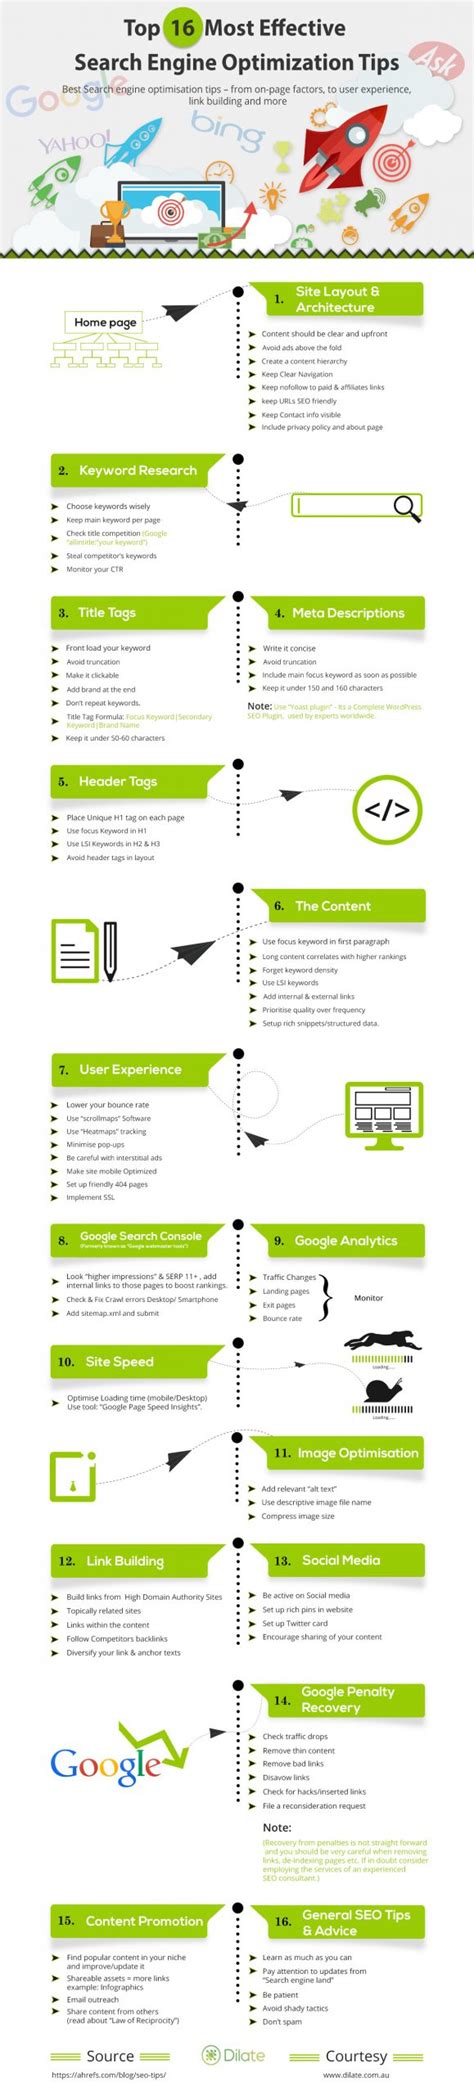 Top 16 Most Effective Search Engine Optimization Tips Visual Contenting